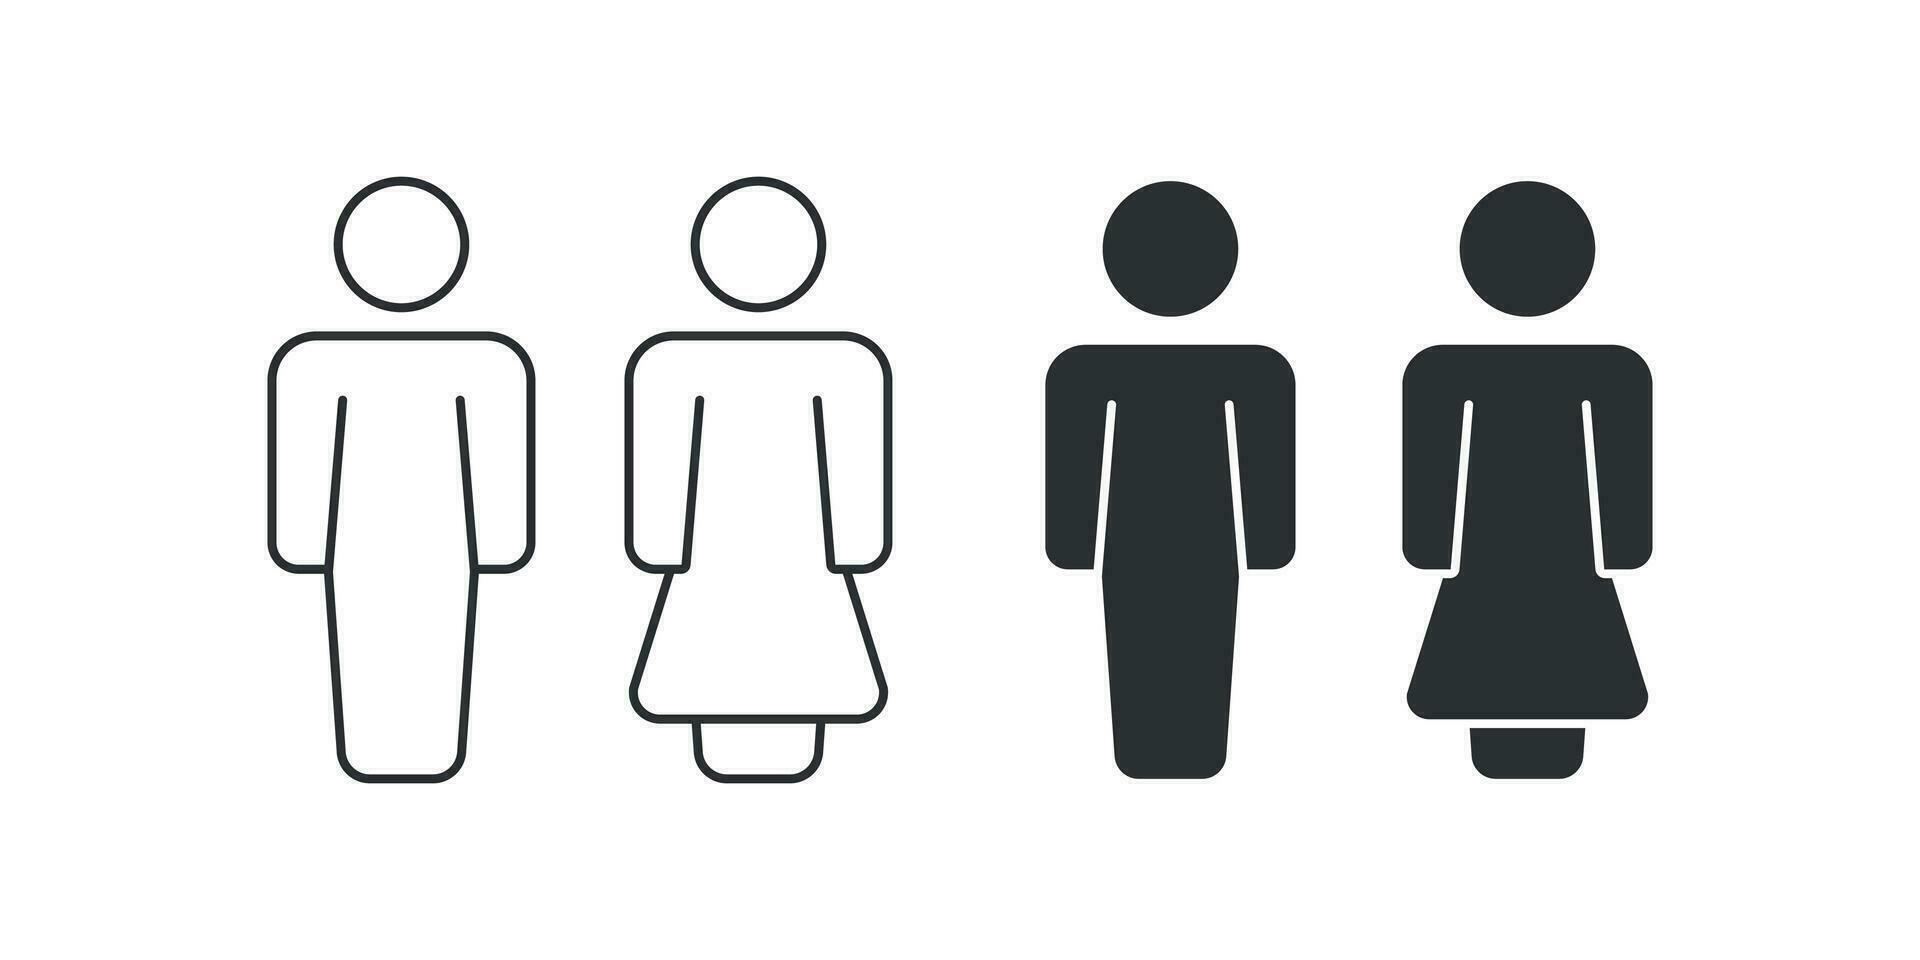 Man and woman icon. Toilet illustration symbol. Sign WC vector